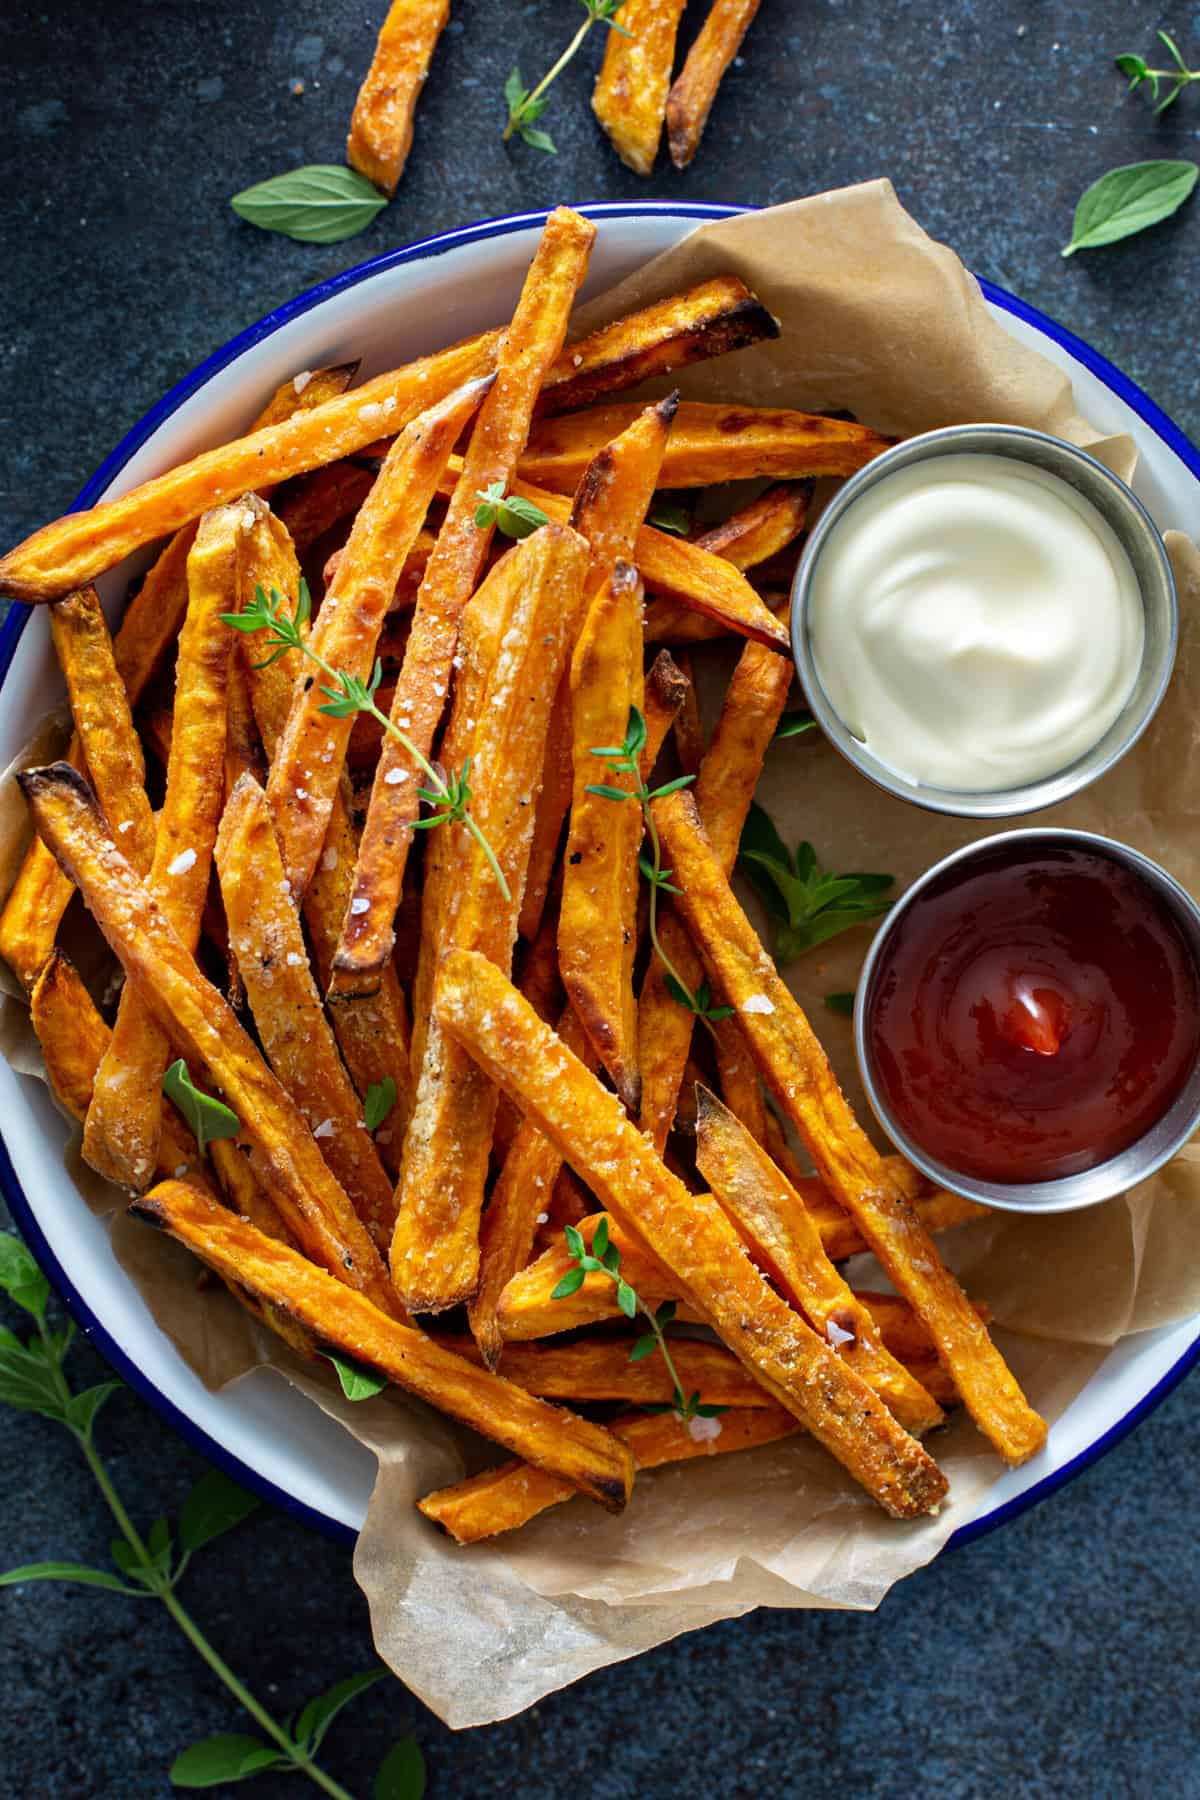 A serving bowl lined with parchment paper, filled with crispy air fryer sweet potato fries, sea salt and fresh herbs, served with ketchup and aioli.